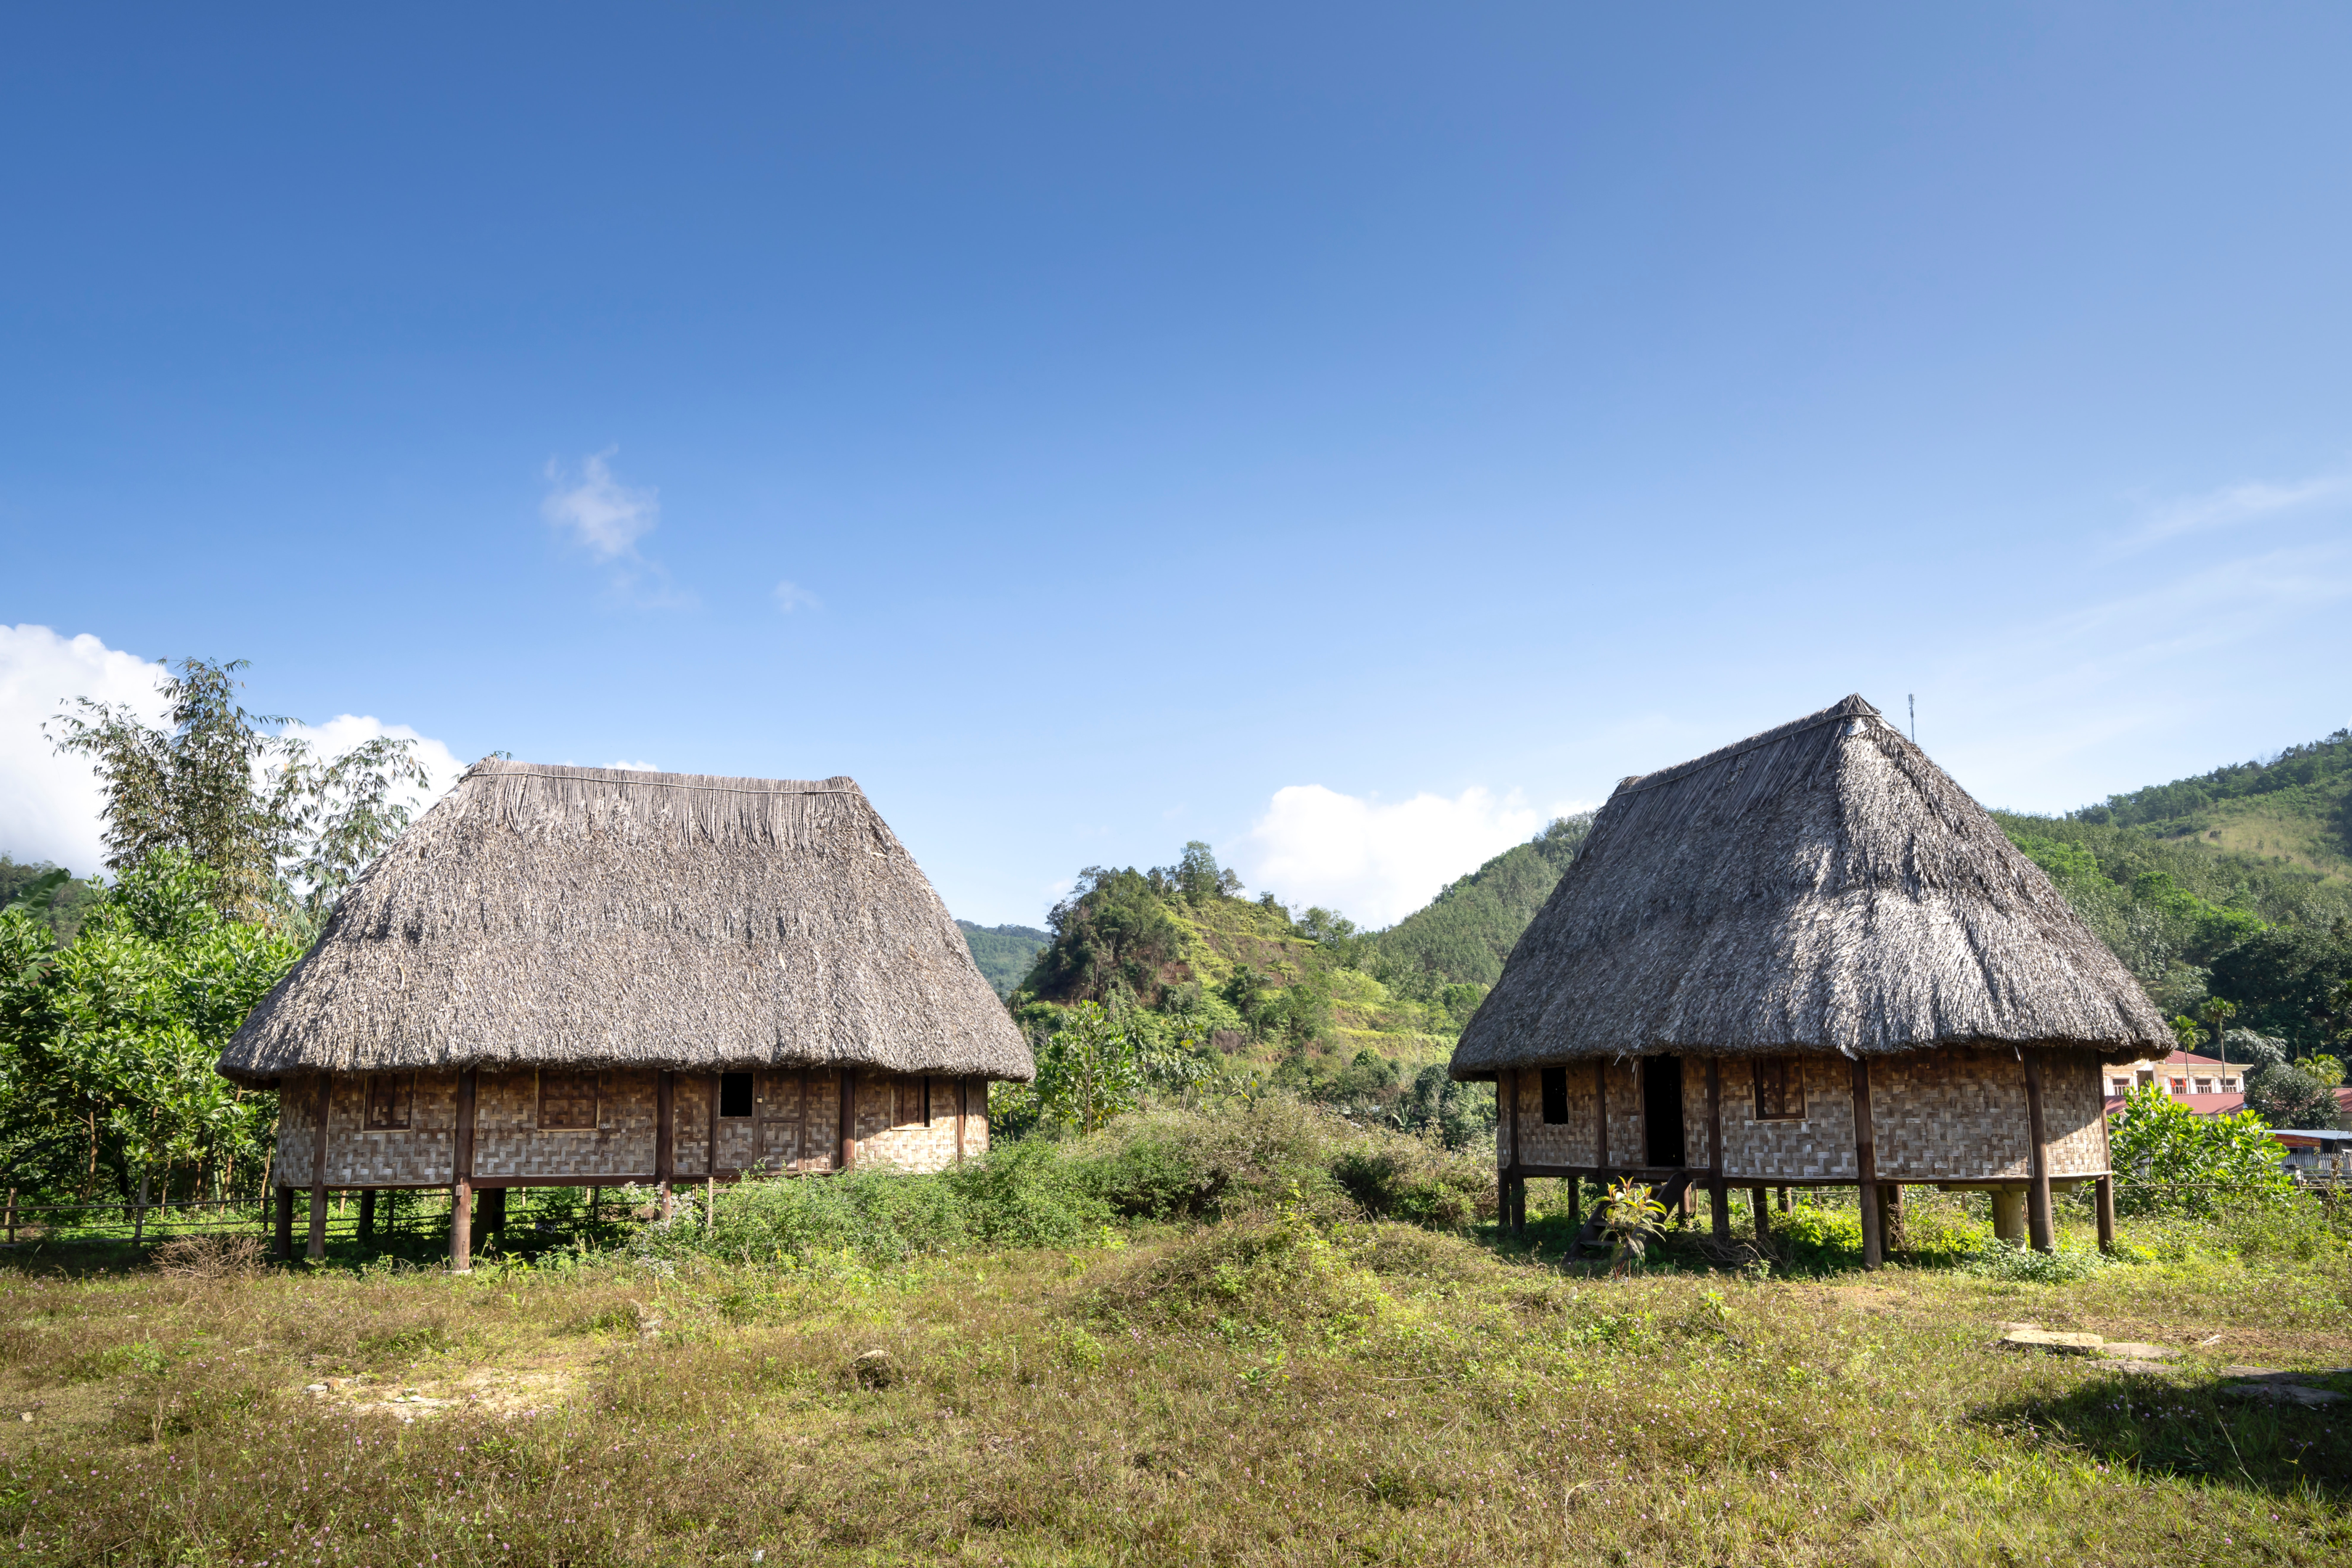 Photo by Quang Nguyen Vinh: https://www.pexels.com/photo/bungalows-with-thatched-roofs-in-village-6415964/